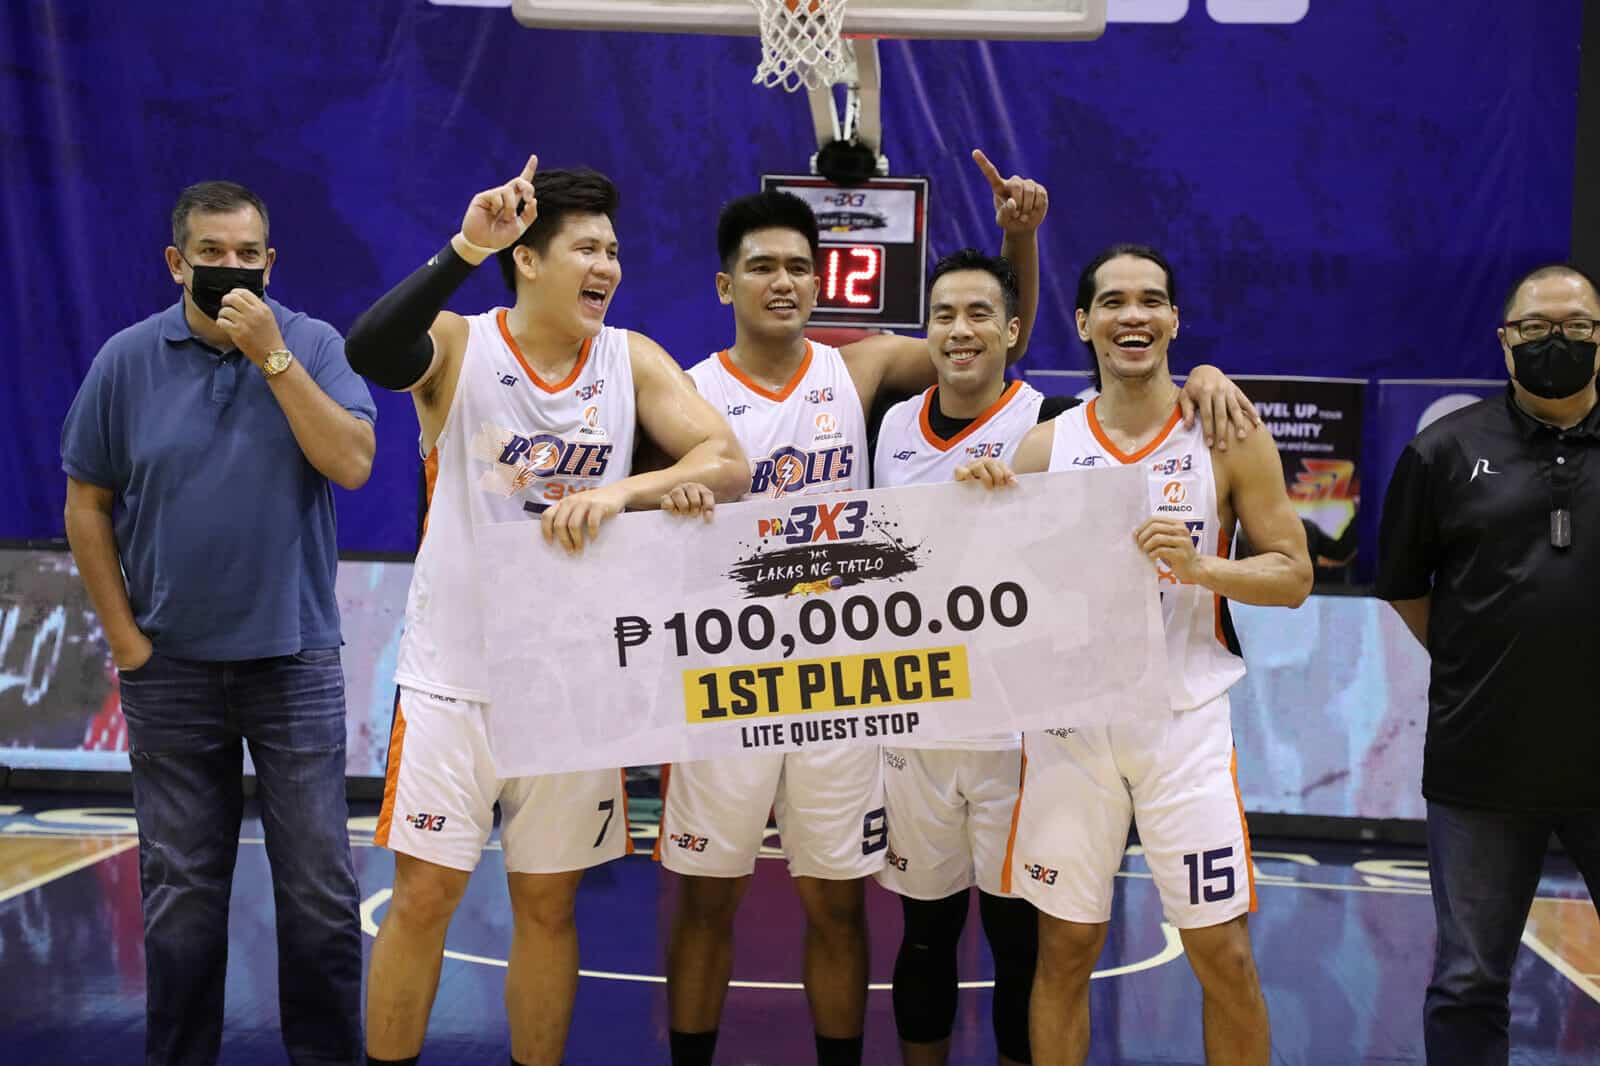 Meralco basketball players celebrate victorious 2nd leg of PBA 3x3 with large check.